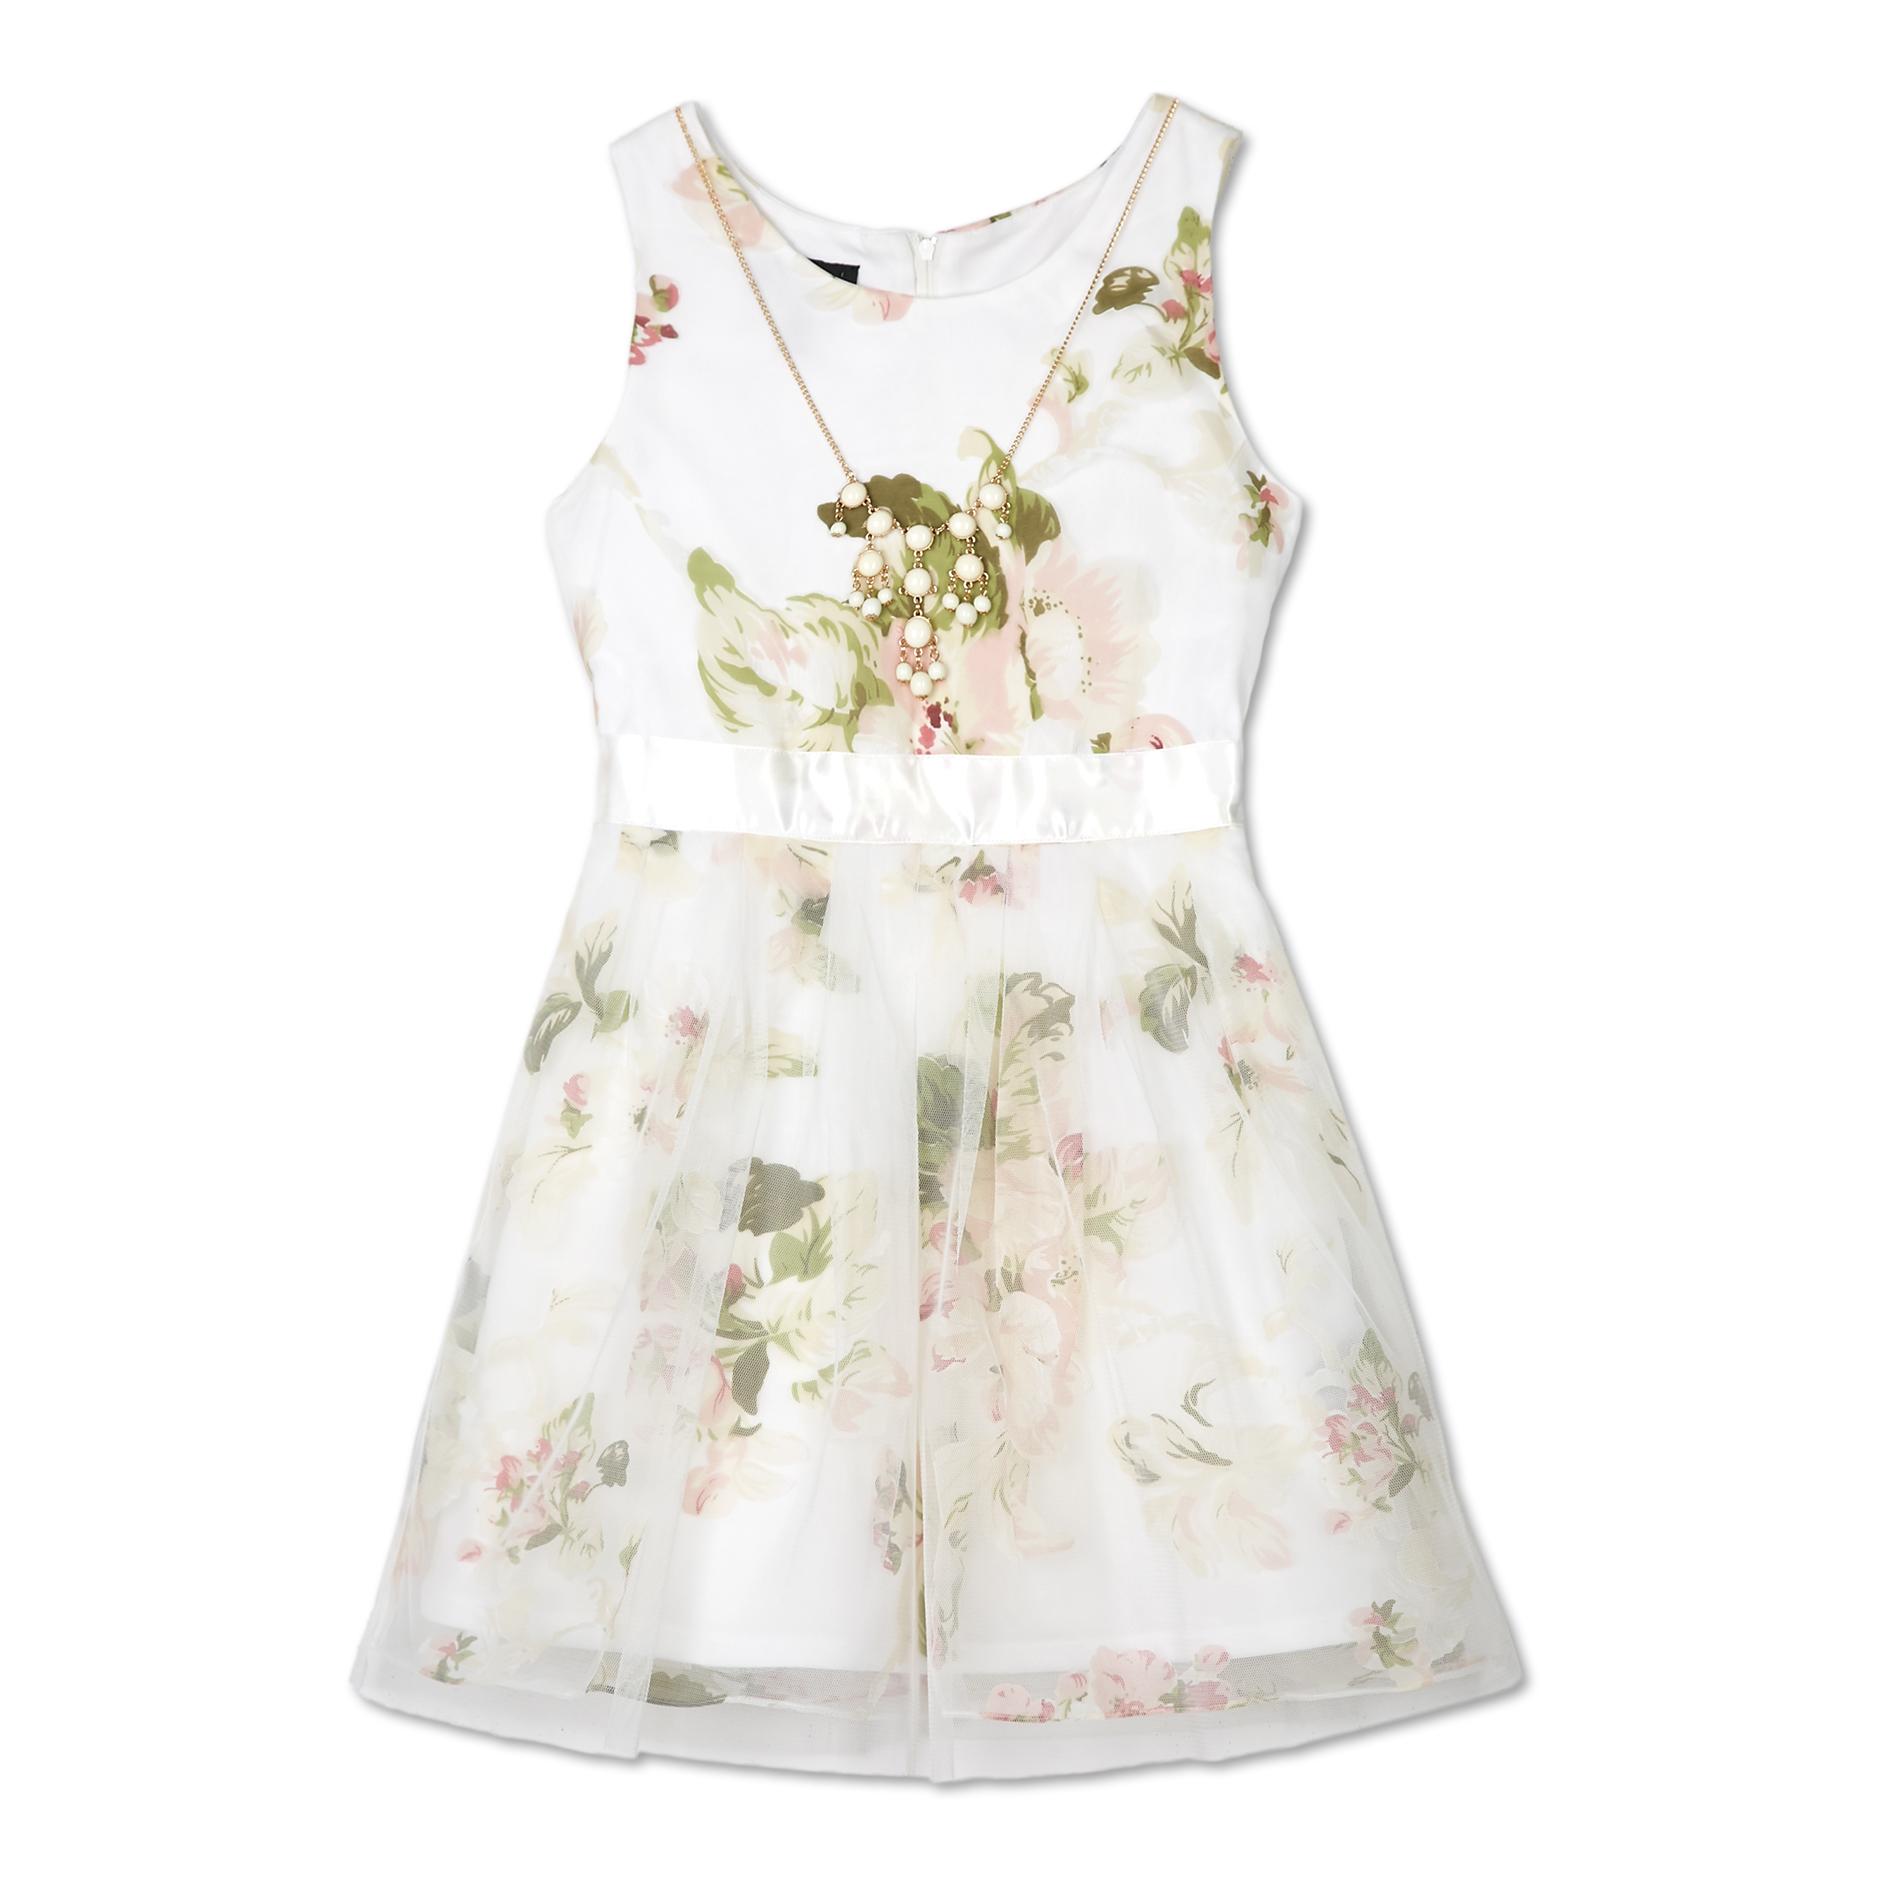 Girl's Sleeveless Dress & Necklace - Floral